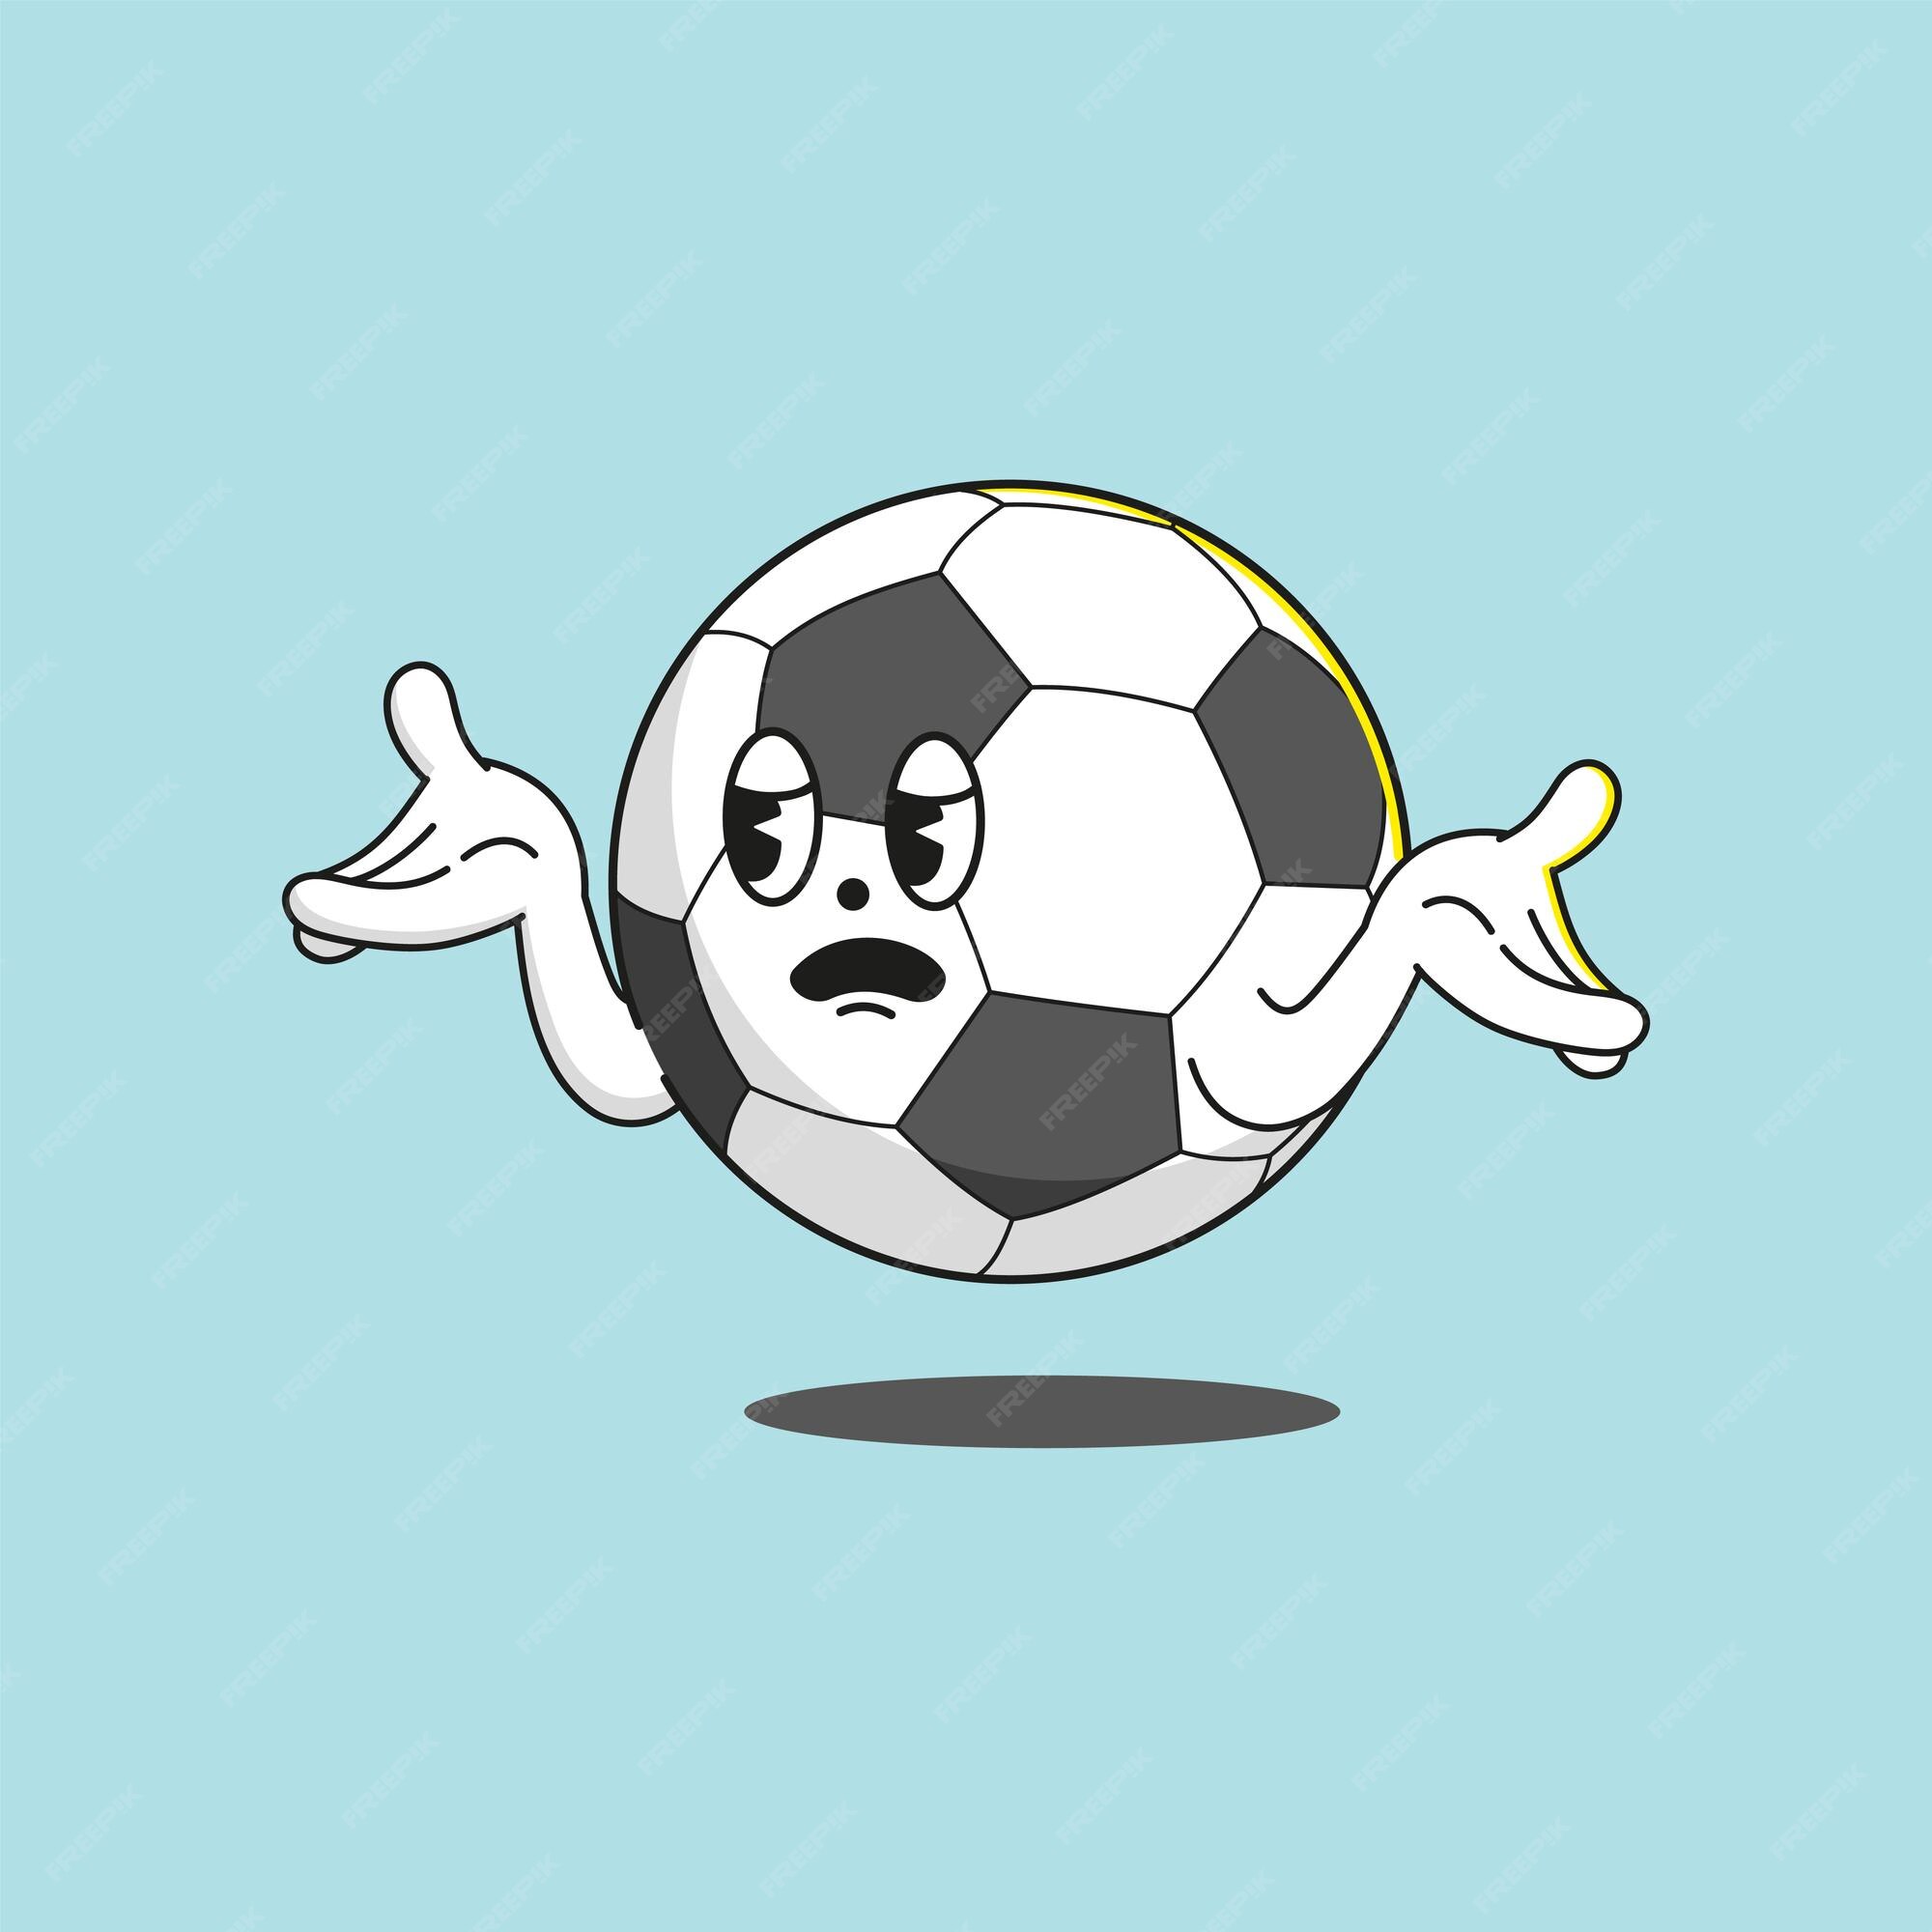 Premium Vector | Cartoon soccer ball don't know expression on isolated  background